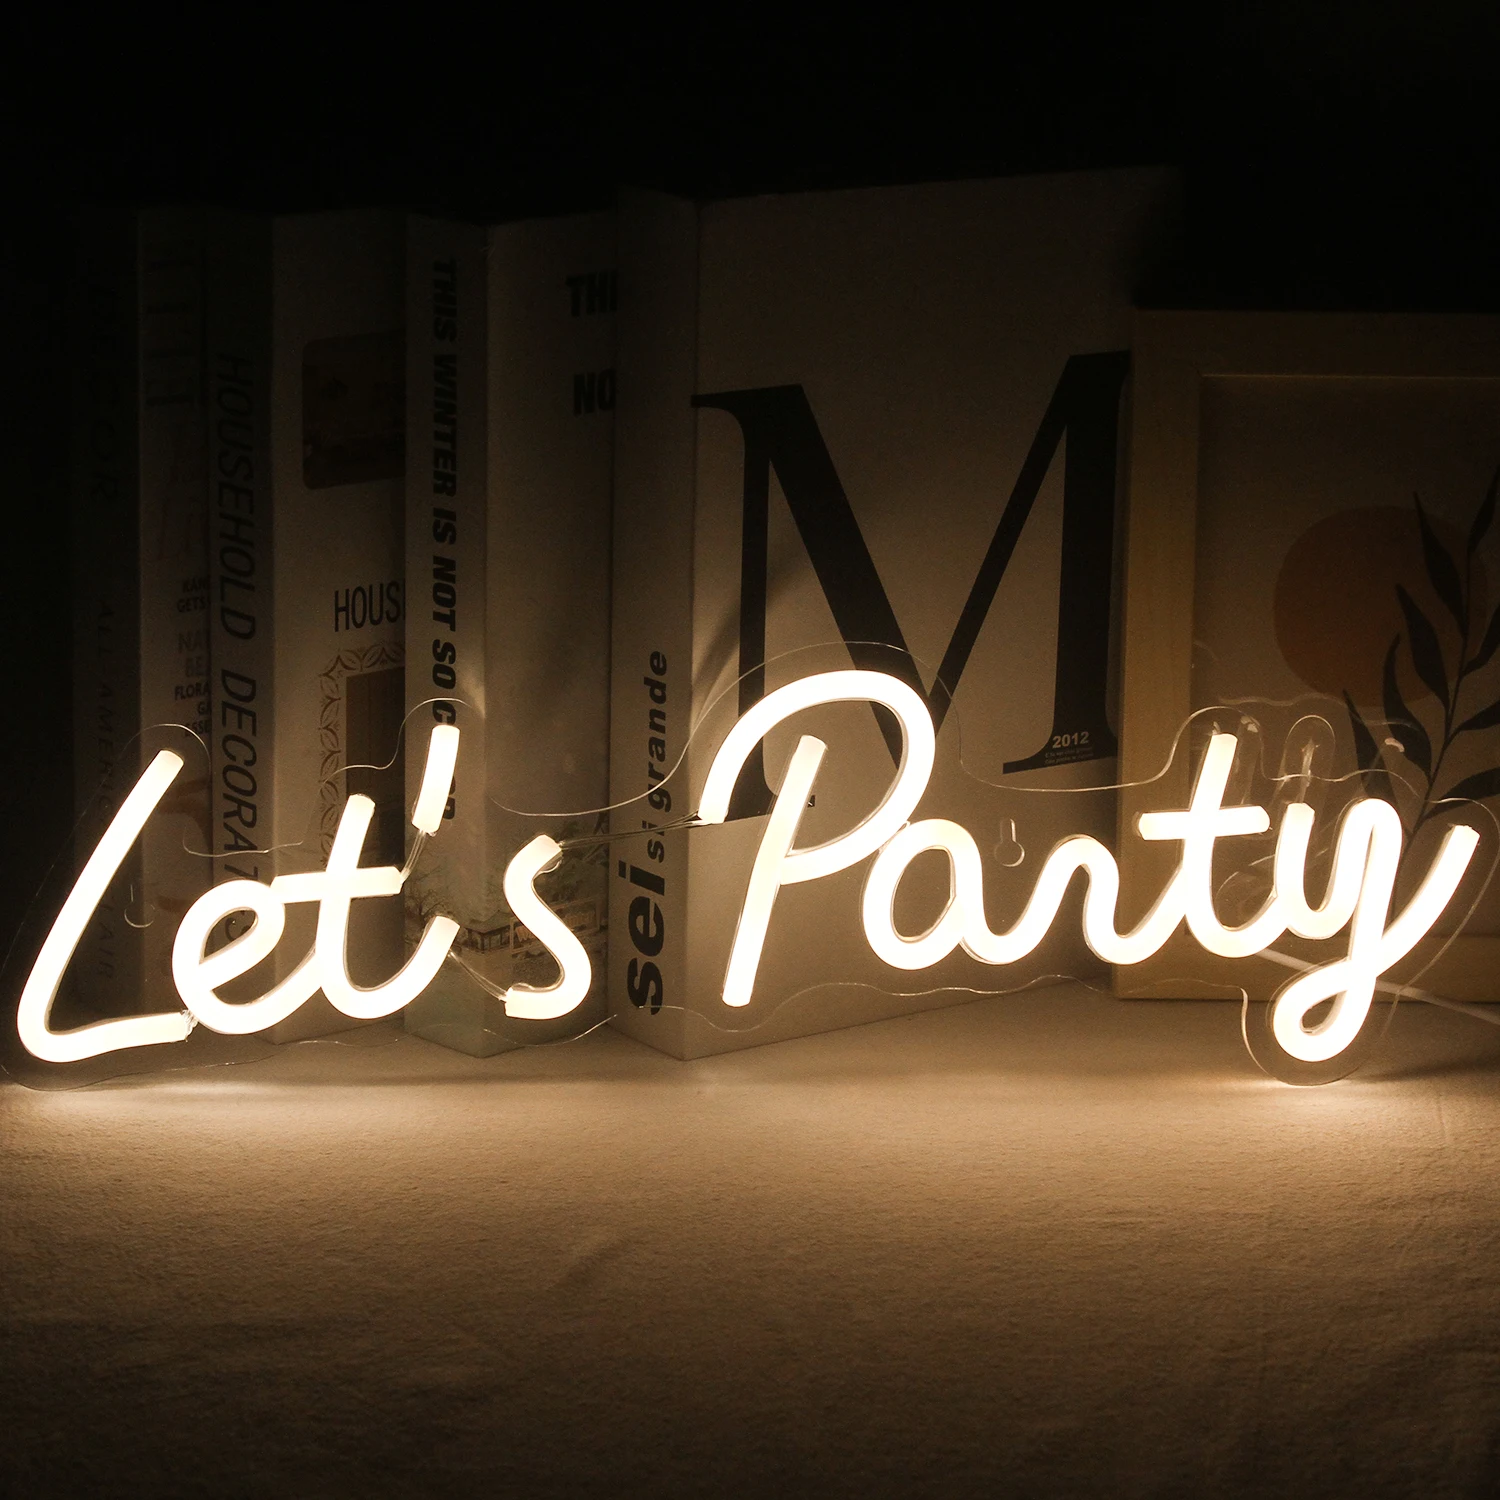 

ineonlife Lets Party Neon Sign Pool Garden birthday Party Home Bar Wedding Decoration Led Bedroom Home Room Decor present